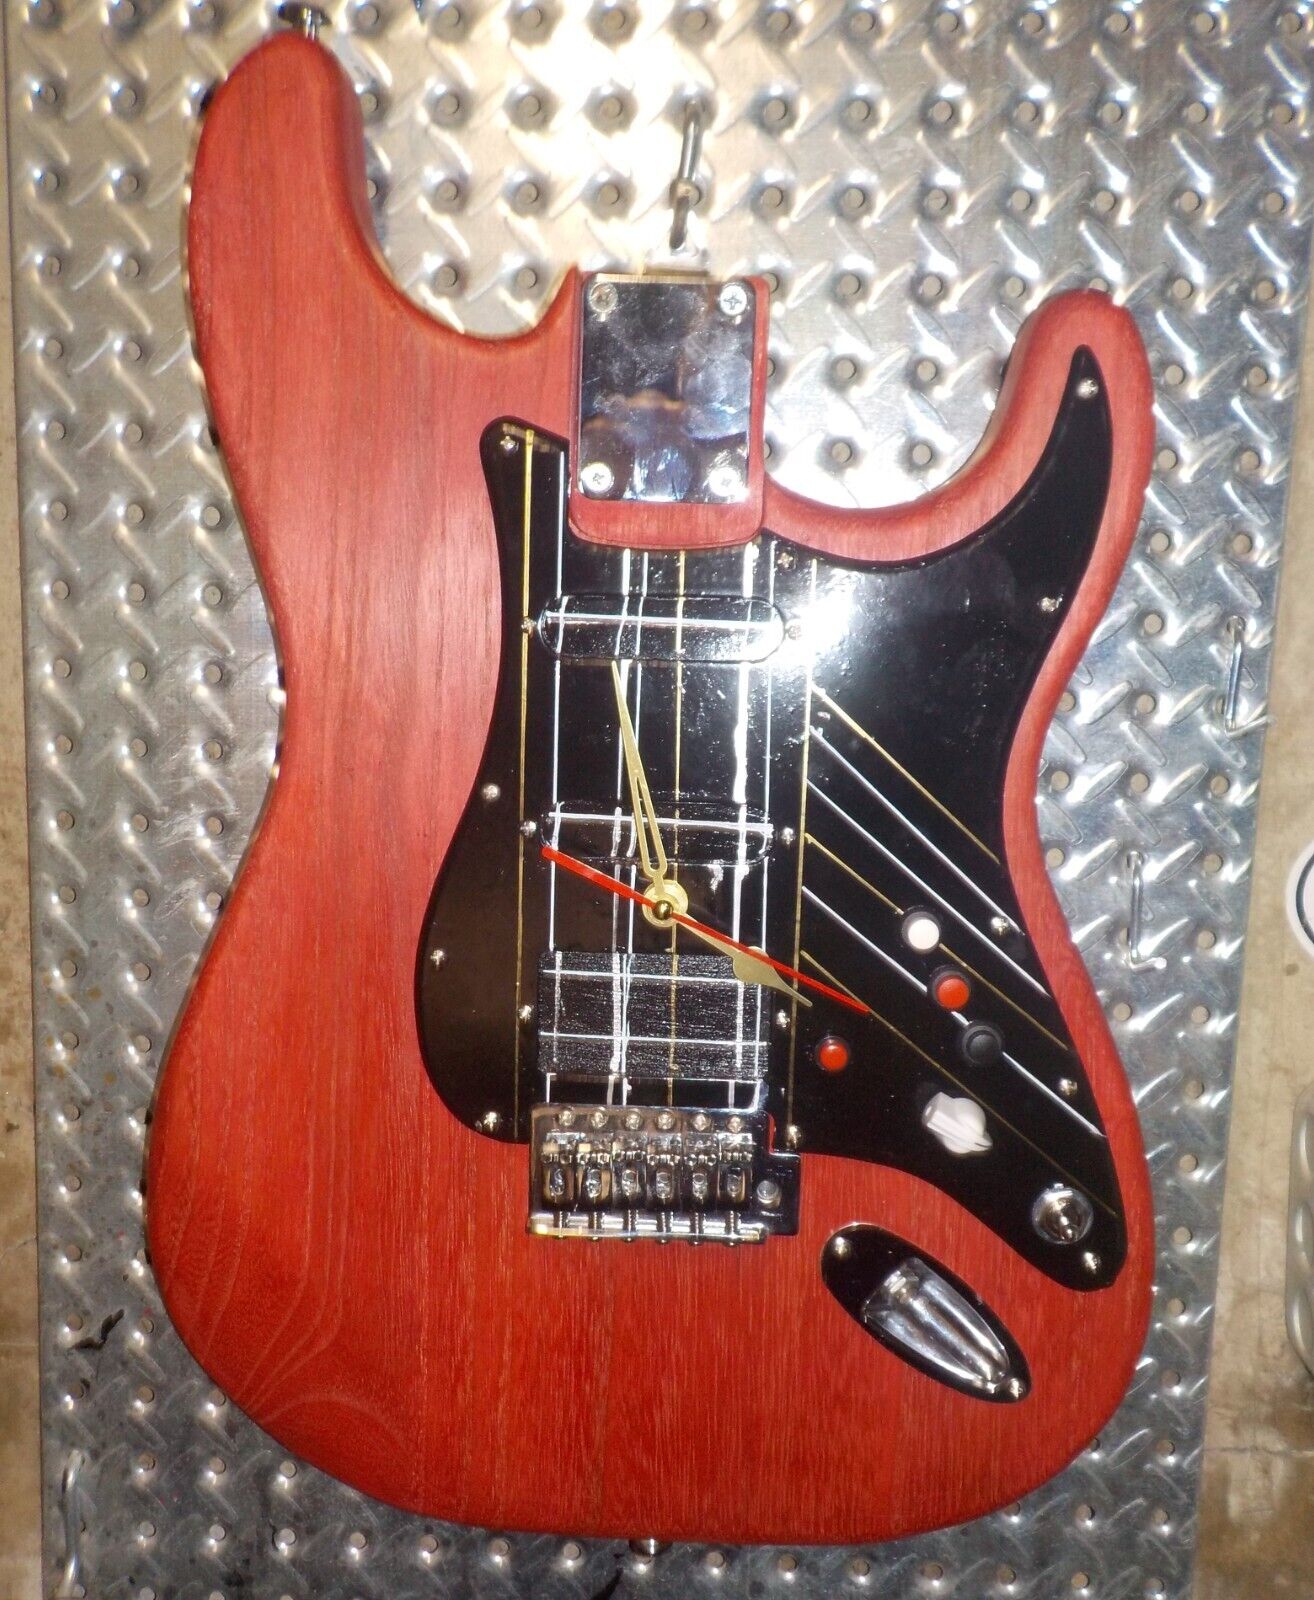 Guitar Wall Clock--Real Guitar Body And Genuine Guitar Parts--From Electroclock